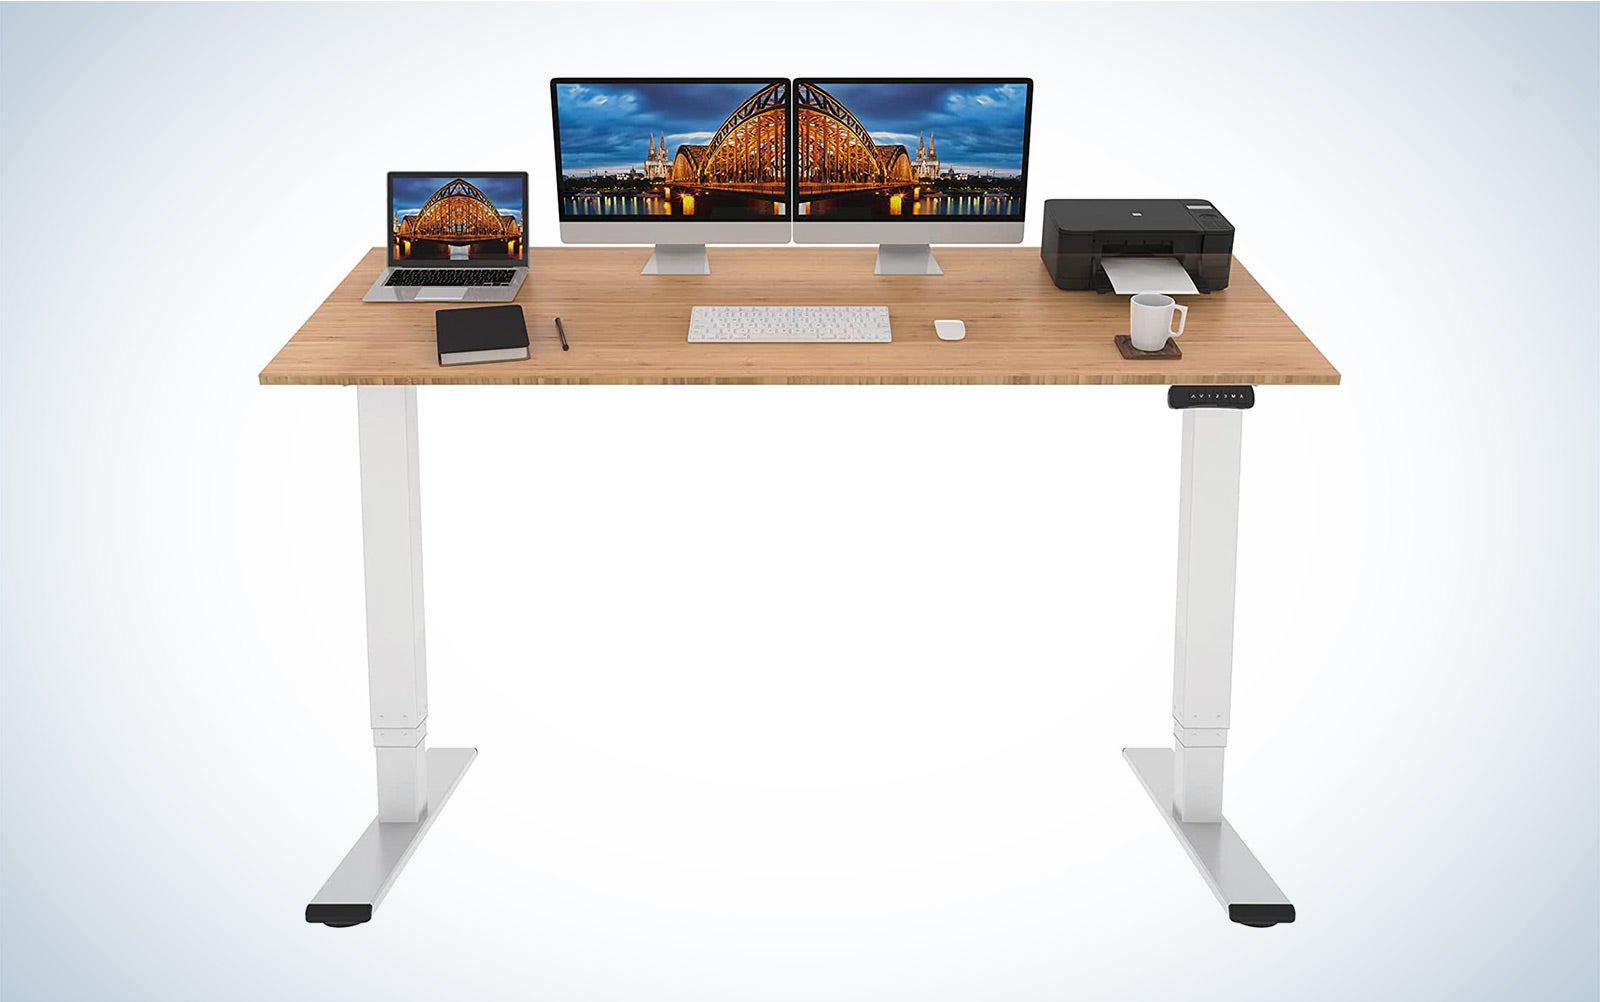 The Flexispot E5 is the best standing desk for dual monitors.